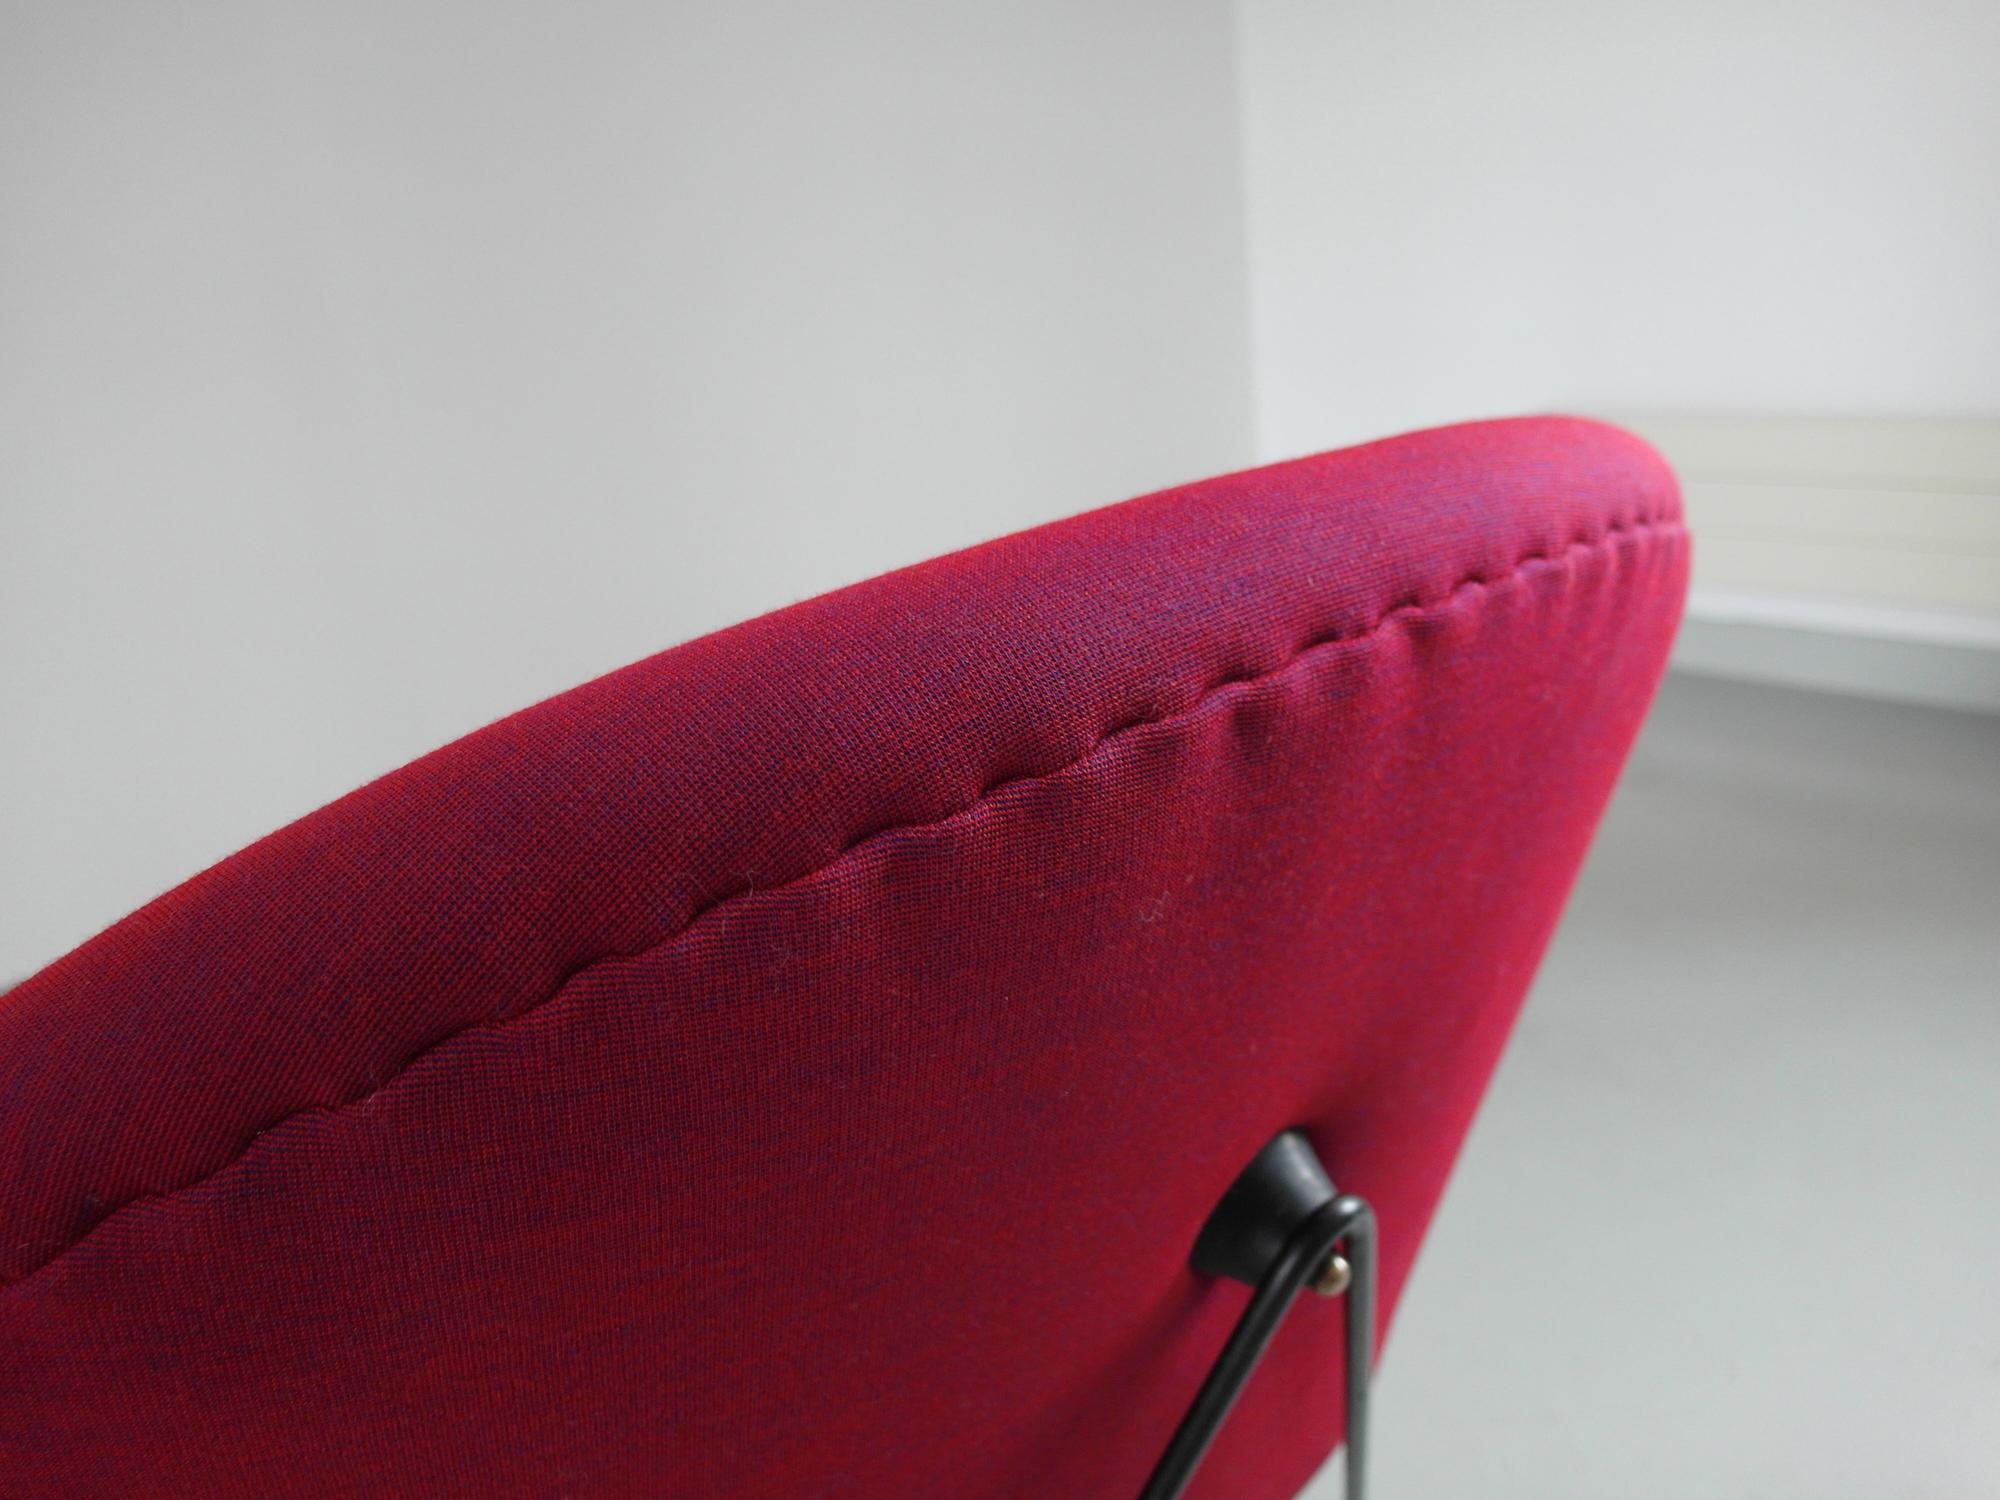 Pair of Cosmos Chairs in Ruby red/ Raspberry red by Augusto Bozzi for Saporiti For Sale 10